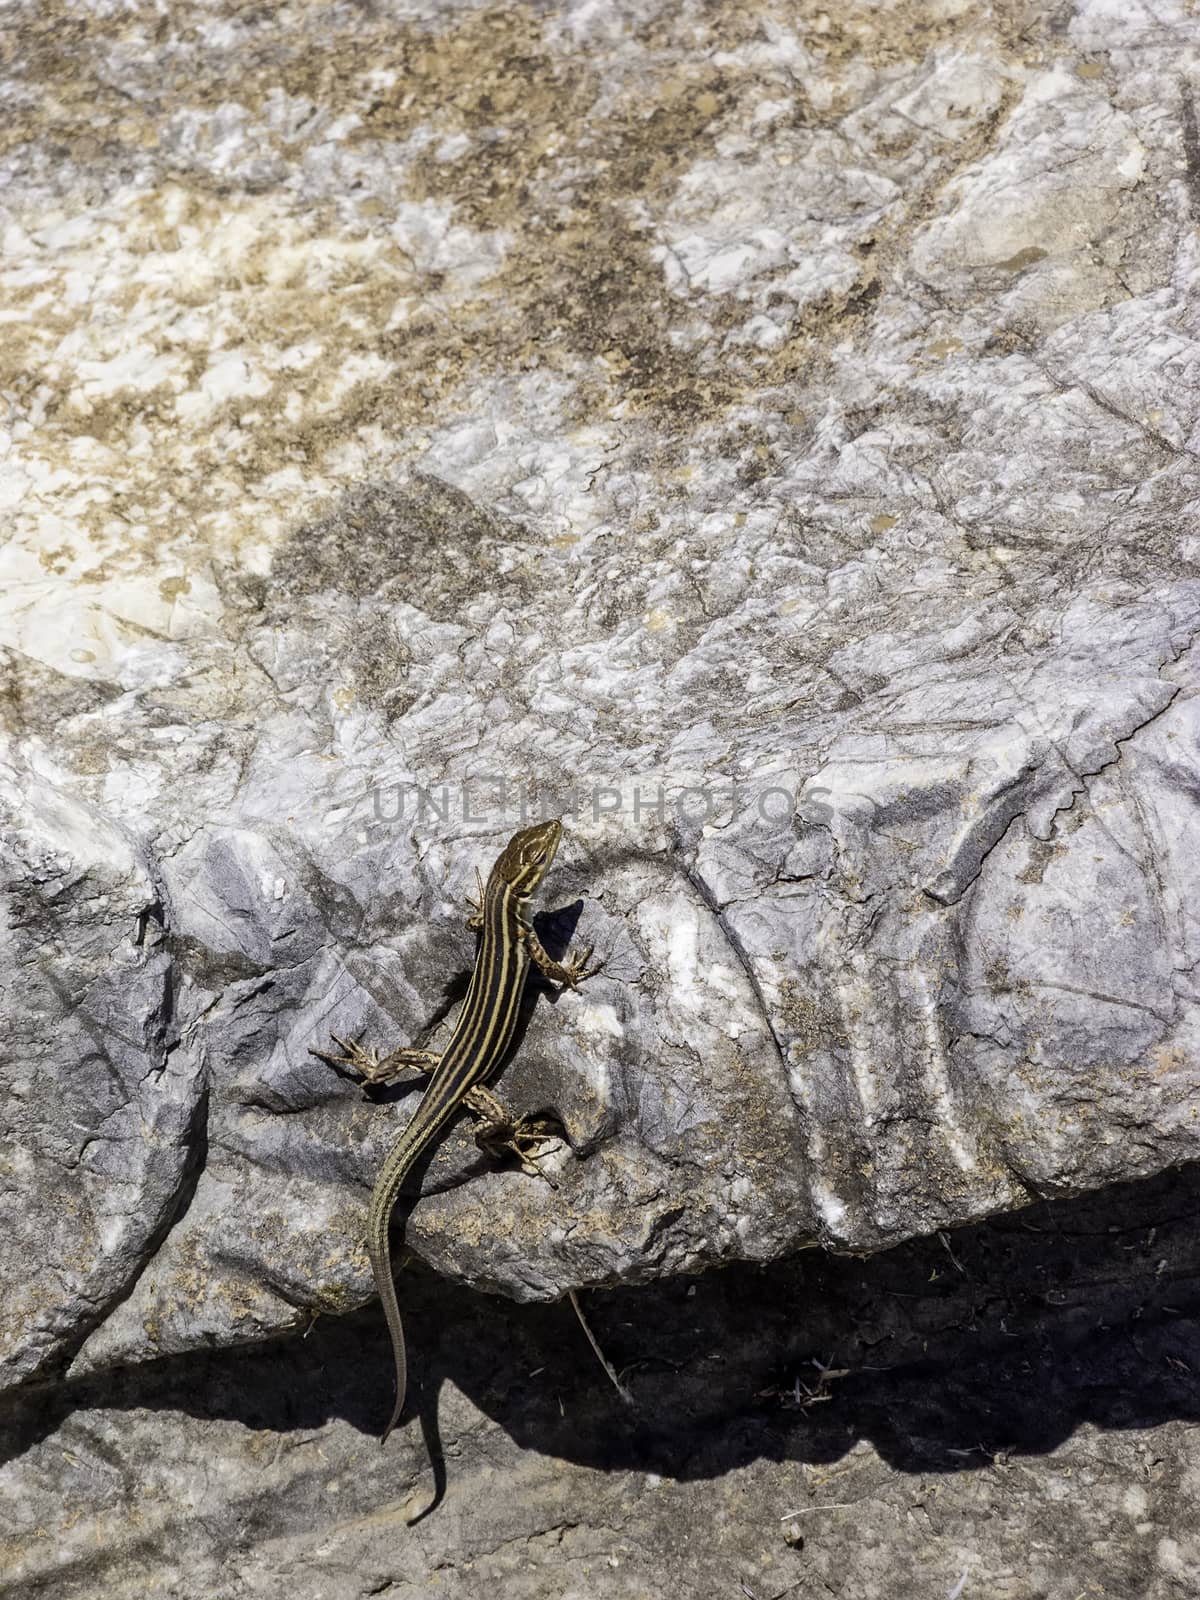 Lizards hiding on the ruins of Ancient Messini, Greece by ankarb